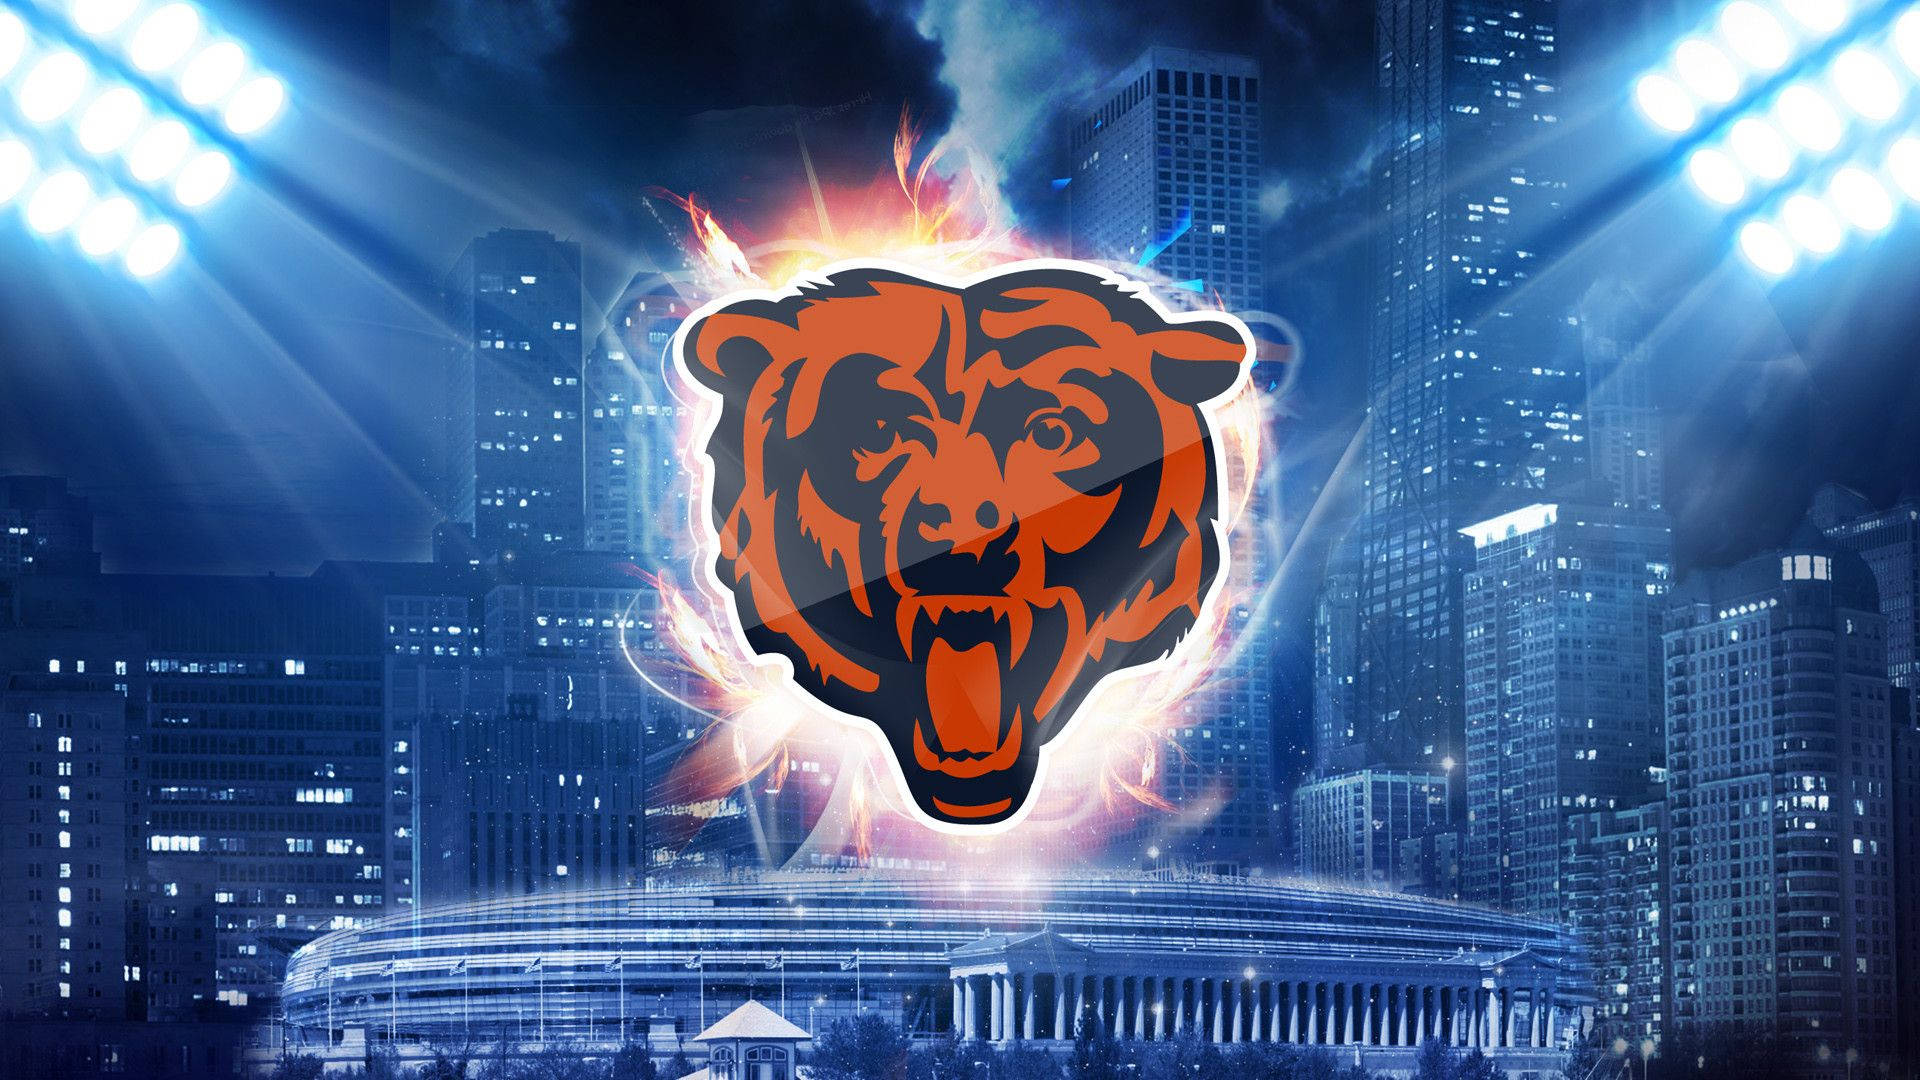 The Chicago Bears: Rooted in Tradition Wallpaper